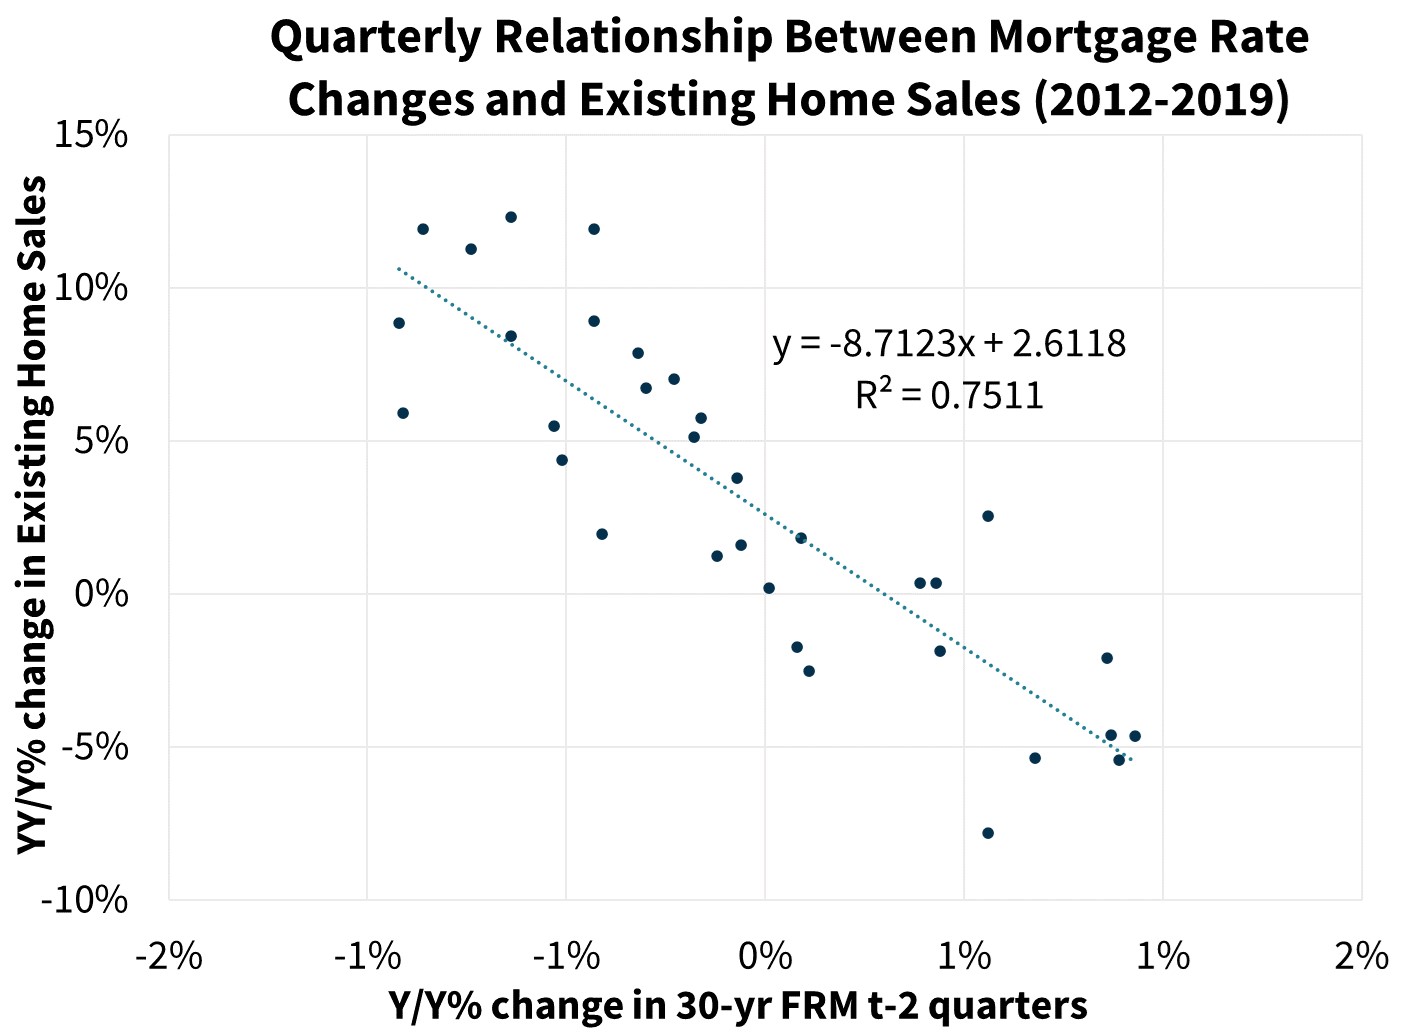 Quarterly relationship between mortgage rate changes and existing home sales (2012-2019)